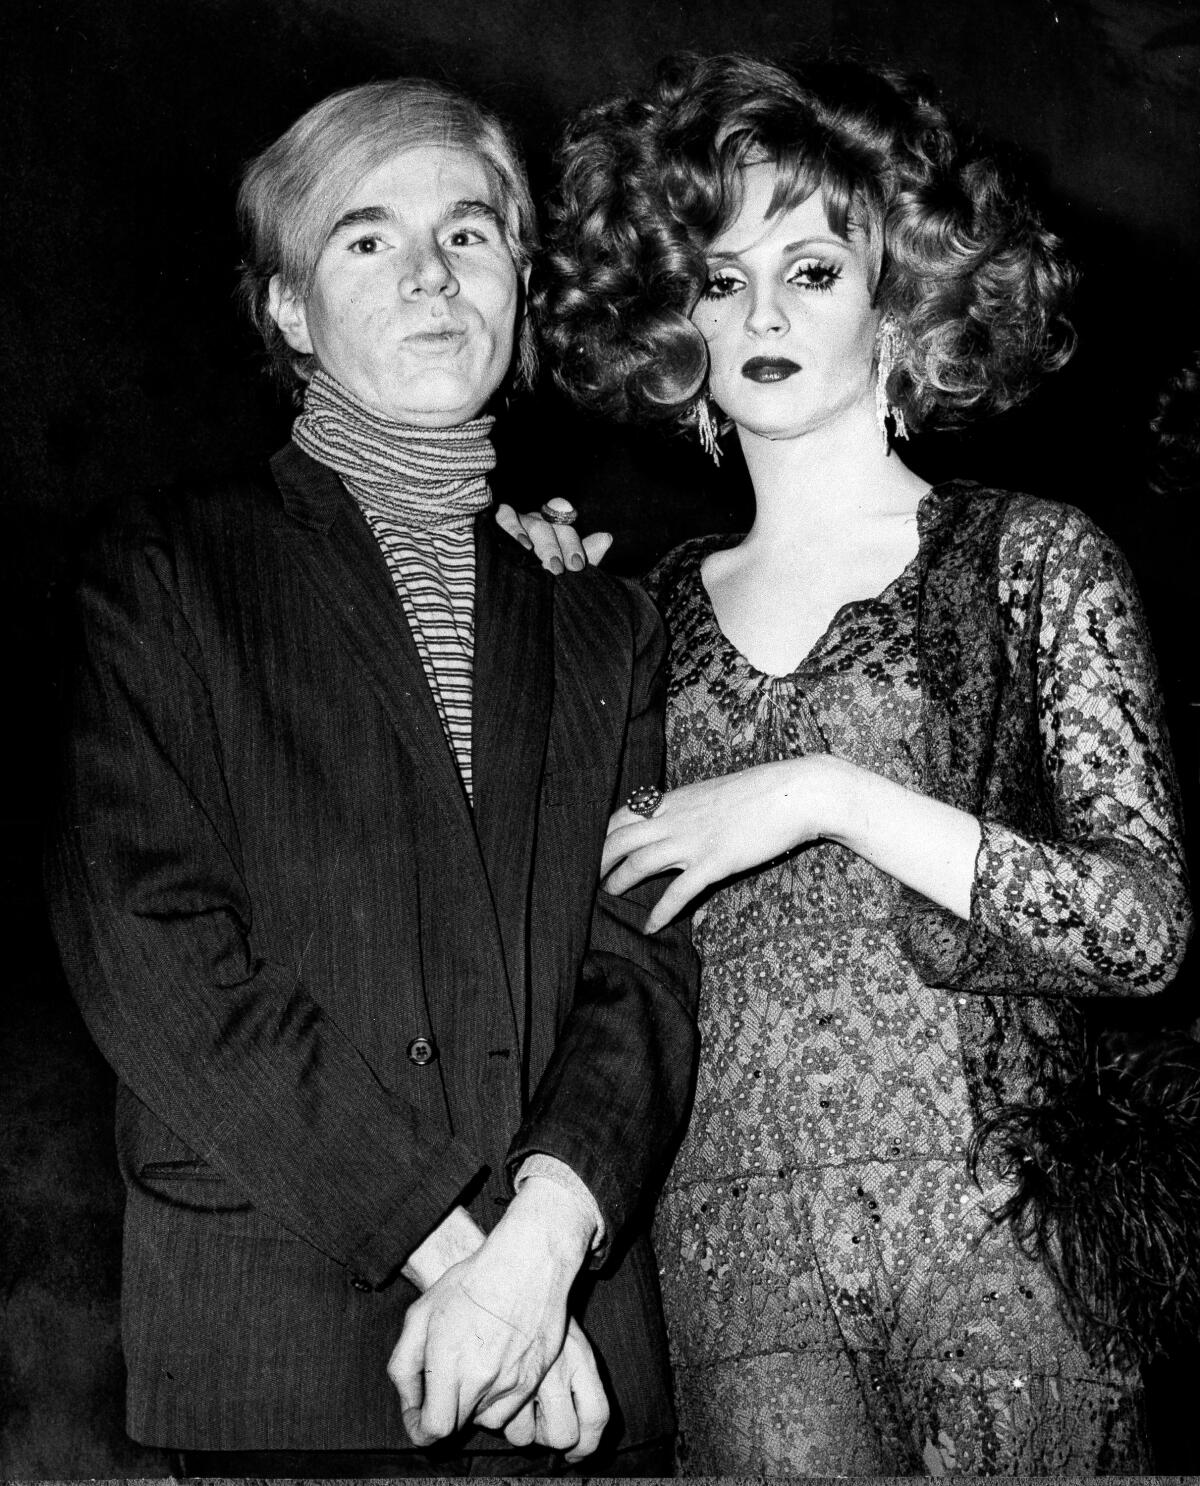 Andy Warhol, in a turtleneck and suit, stands next to Candy Darling, with short curly hair and a lace dress.